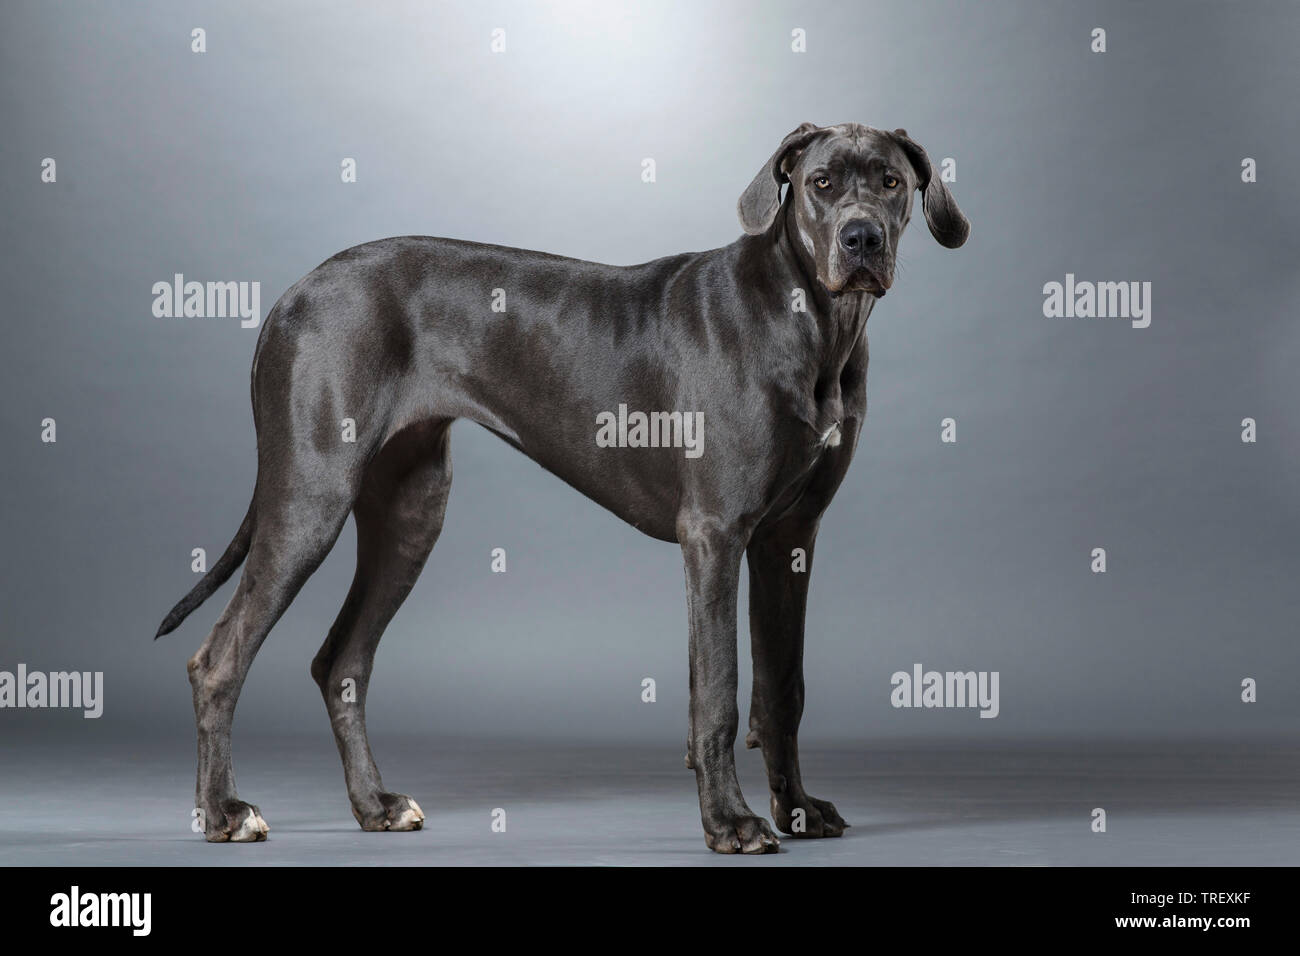 Great Dane. Adult dog standing, seen side-on. Studio picture against a gray background. Germany Stock Photo